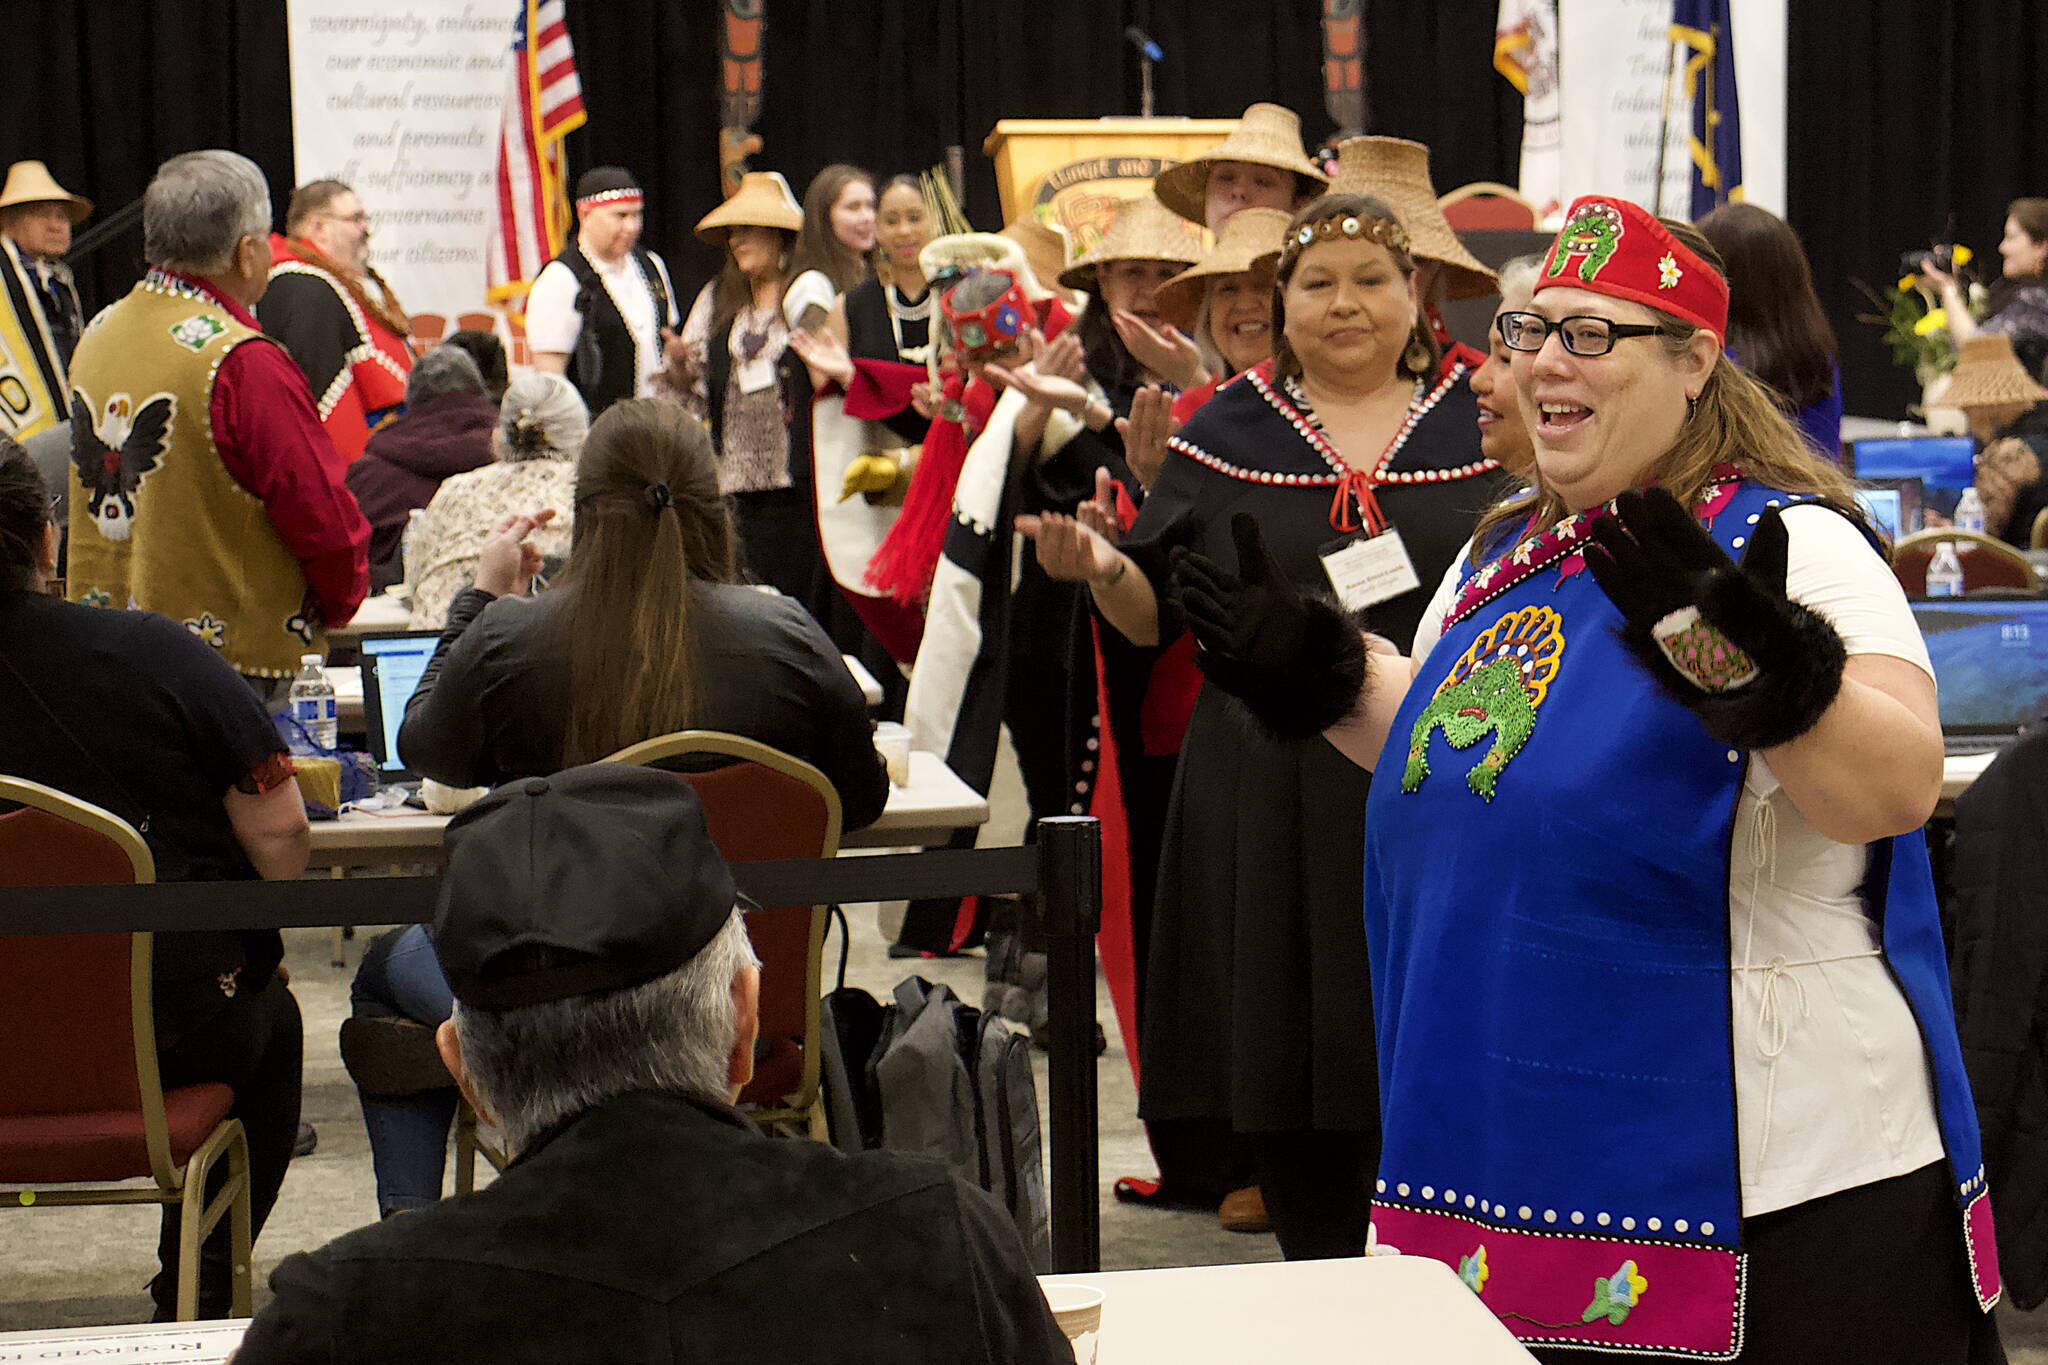 The Eagle/Raven Dance Group completes their grand entrance among delegates Wednesday morning at Elizabeth Peratrovich Hall to mark the beginning of the 88th annual tribal assembly of the Central Council of the Tlingit and Haida Indian Tribes of Alaska. The theme of three-day assembly, held in person for the first time since 2019 due to the COVID-19 pandemic, is “Sovereignty: In Land We Trust.” (Mark Sabbatini / Juneau Empire)